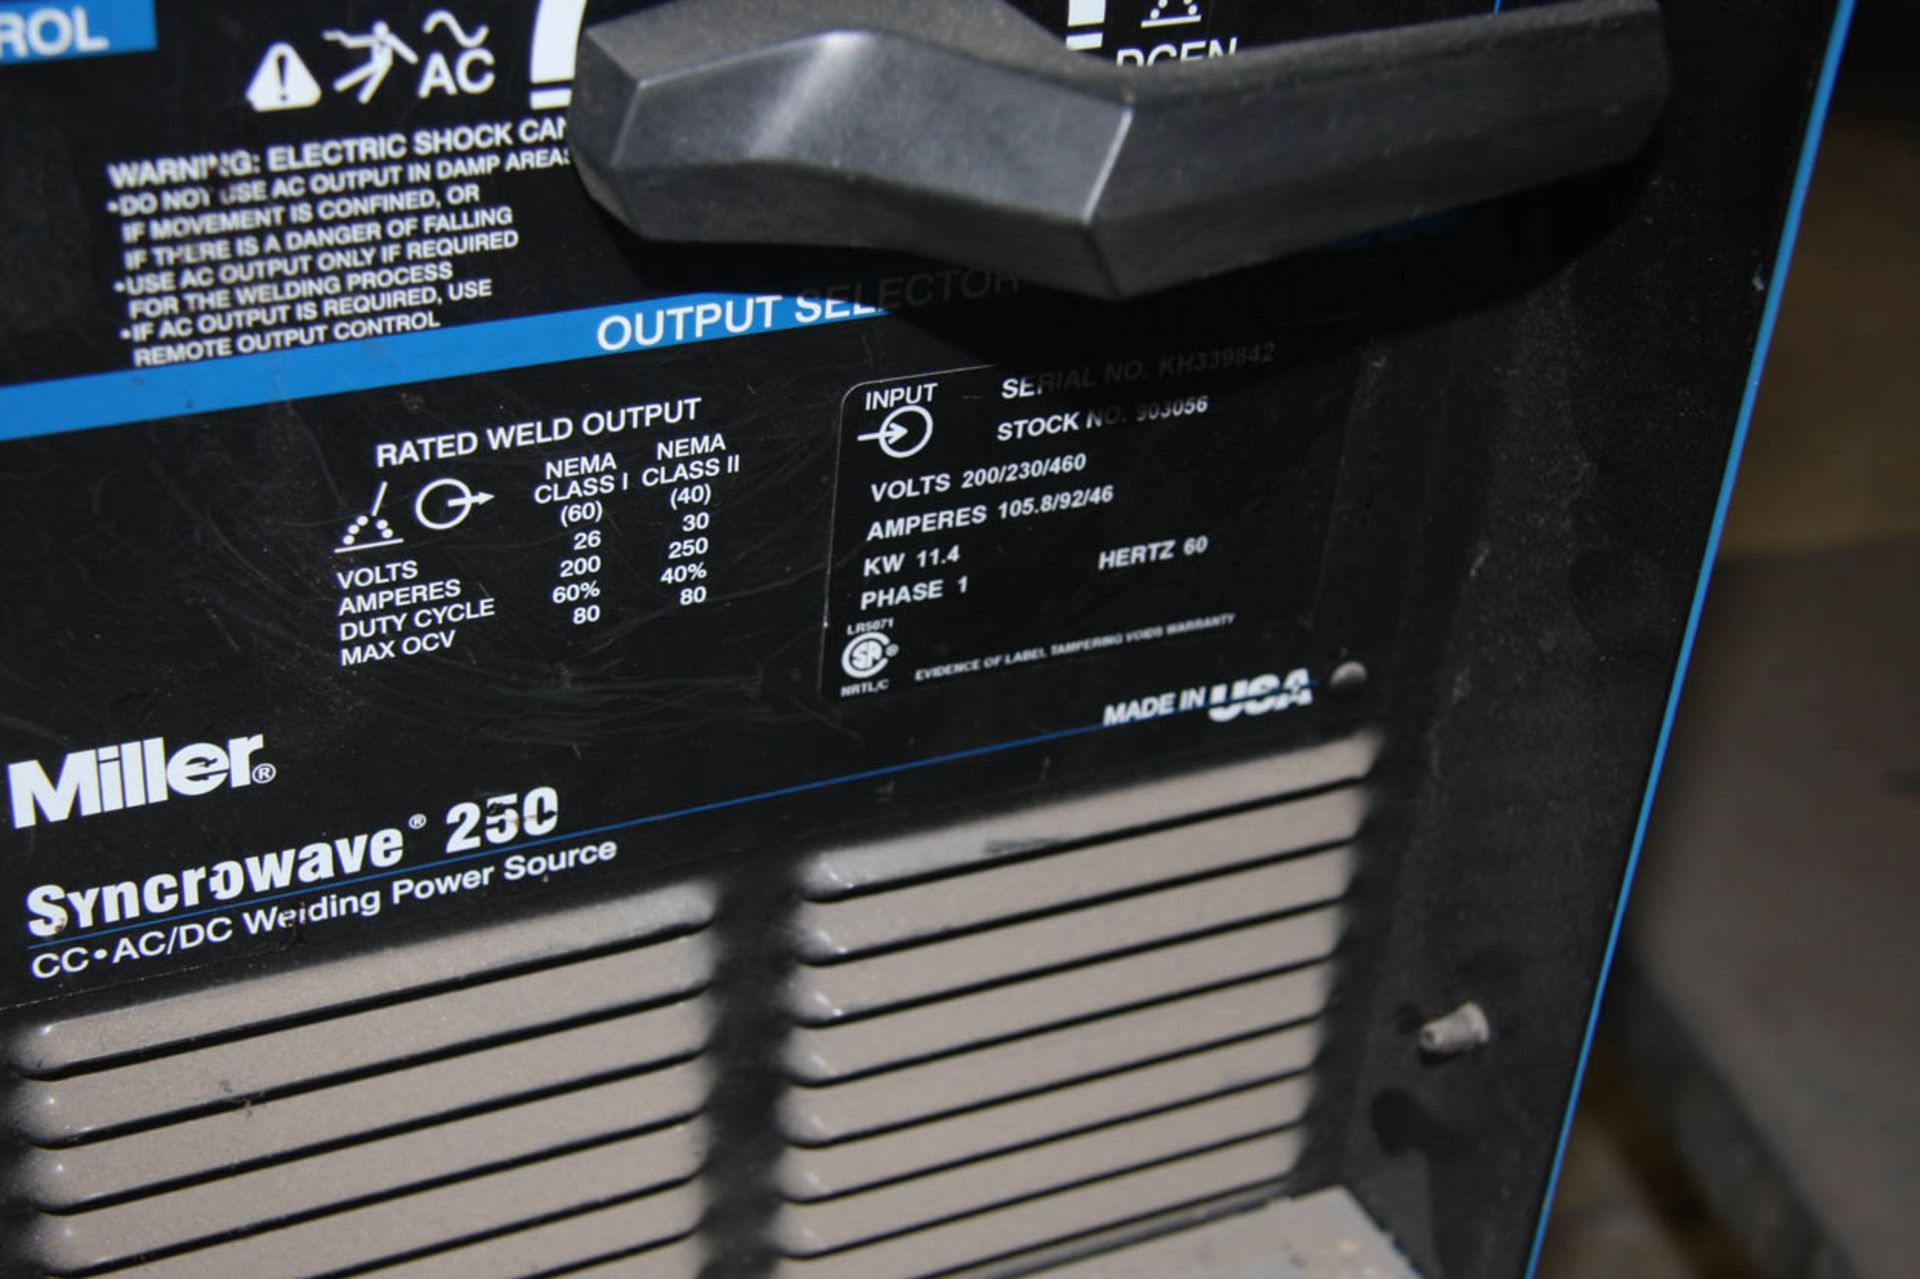 Miller Syncrowave 250 CC-AC/DC Welding Power Source - Image 3 of 3